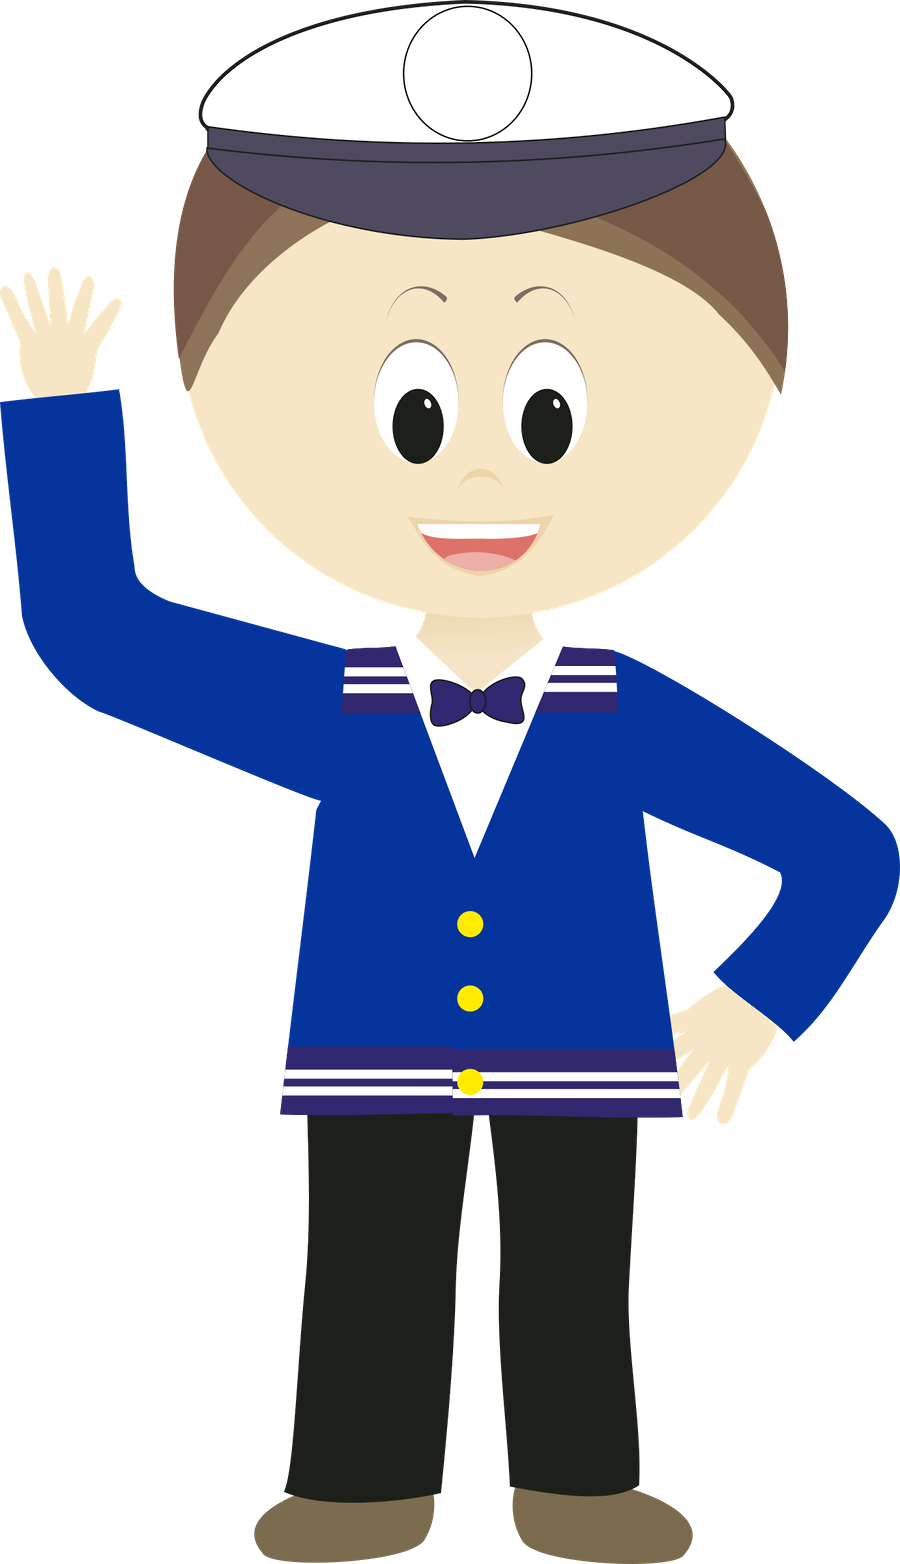 Sailor clipart military person. Minus say hello cards